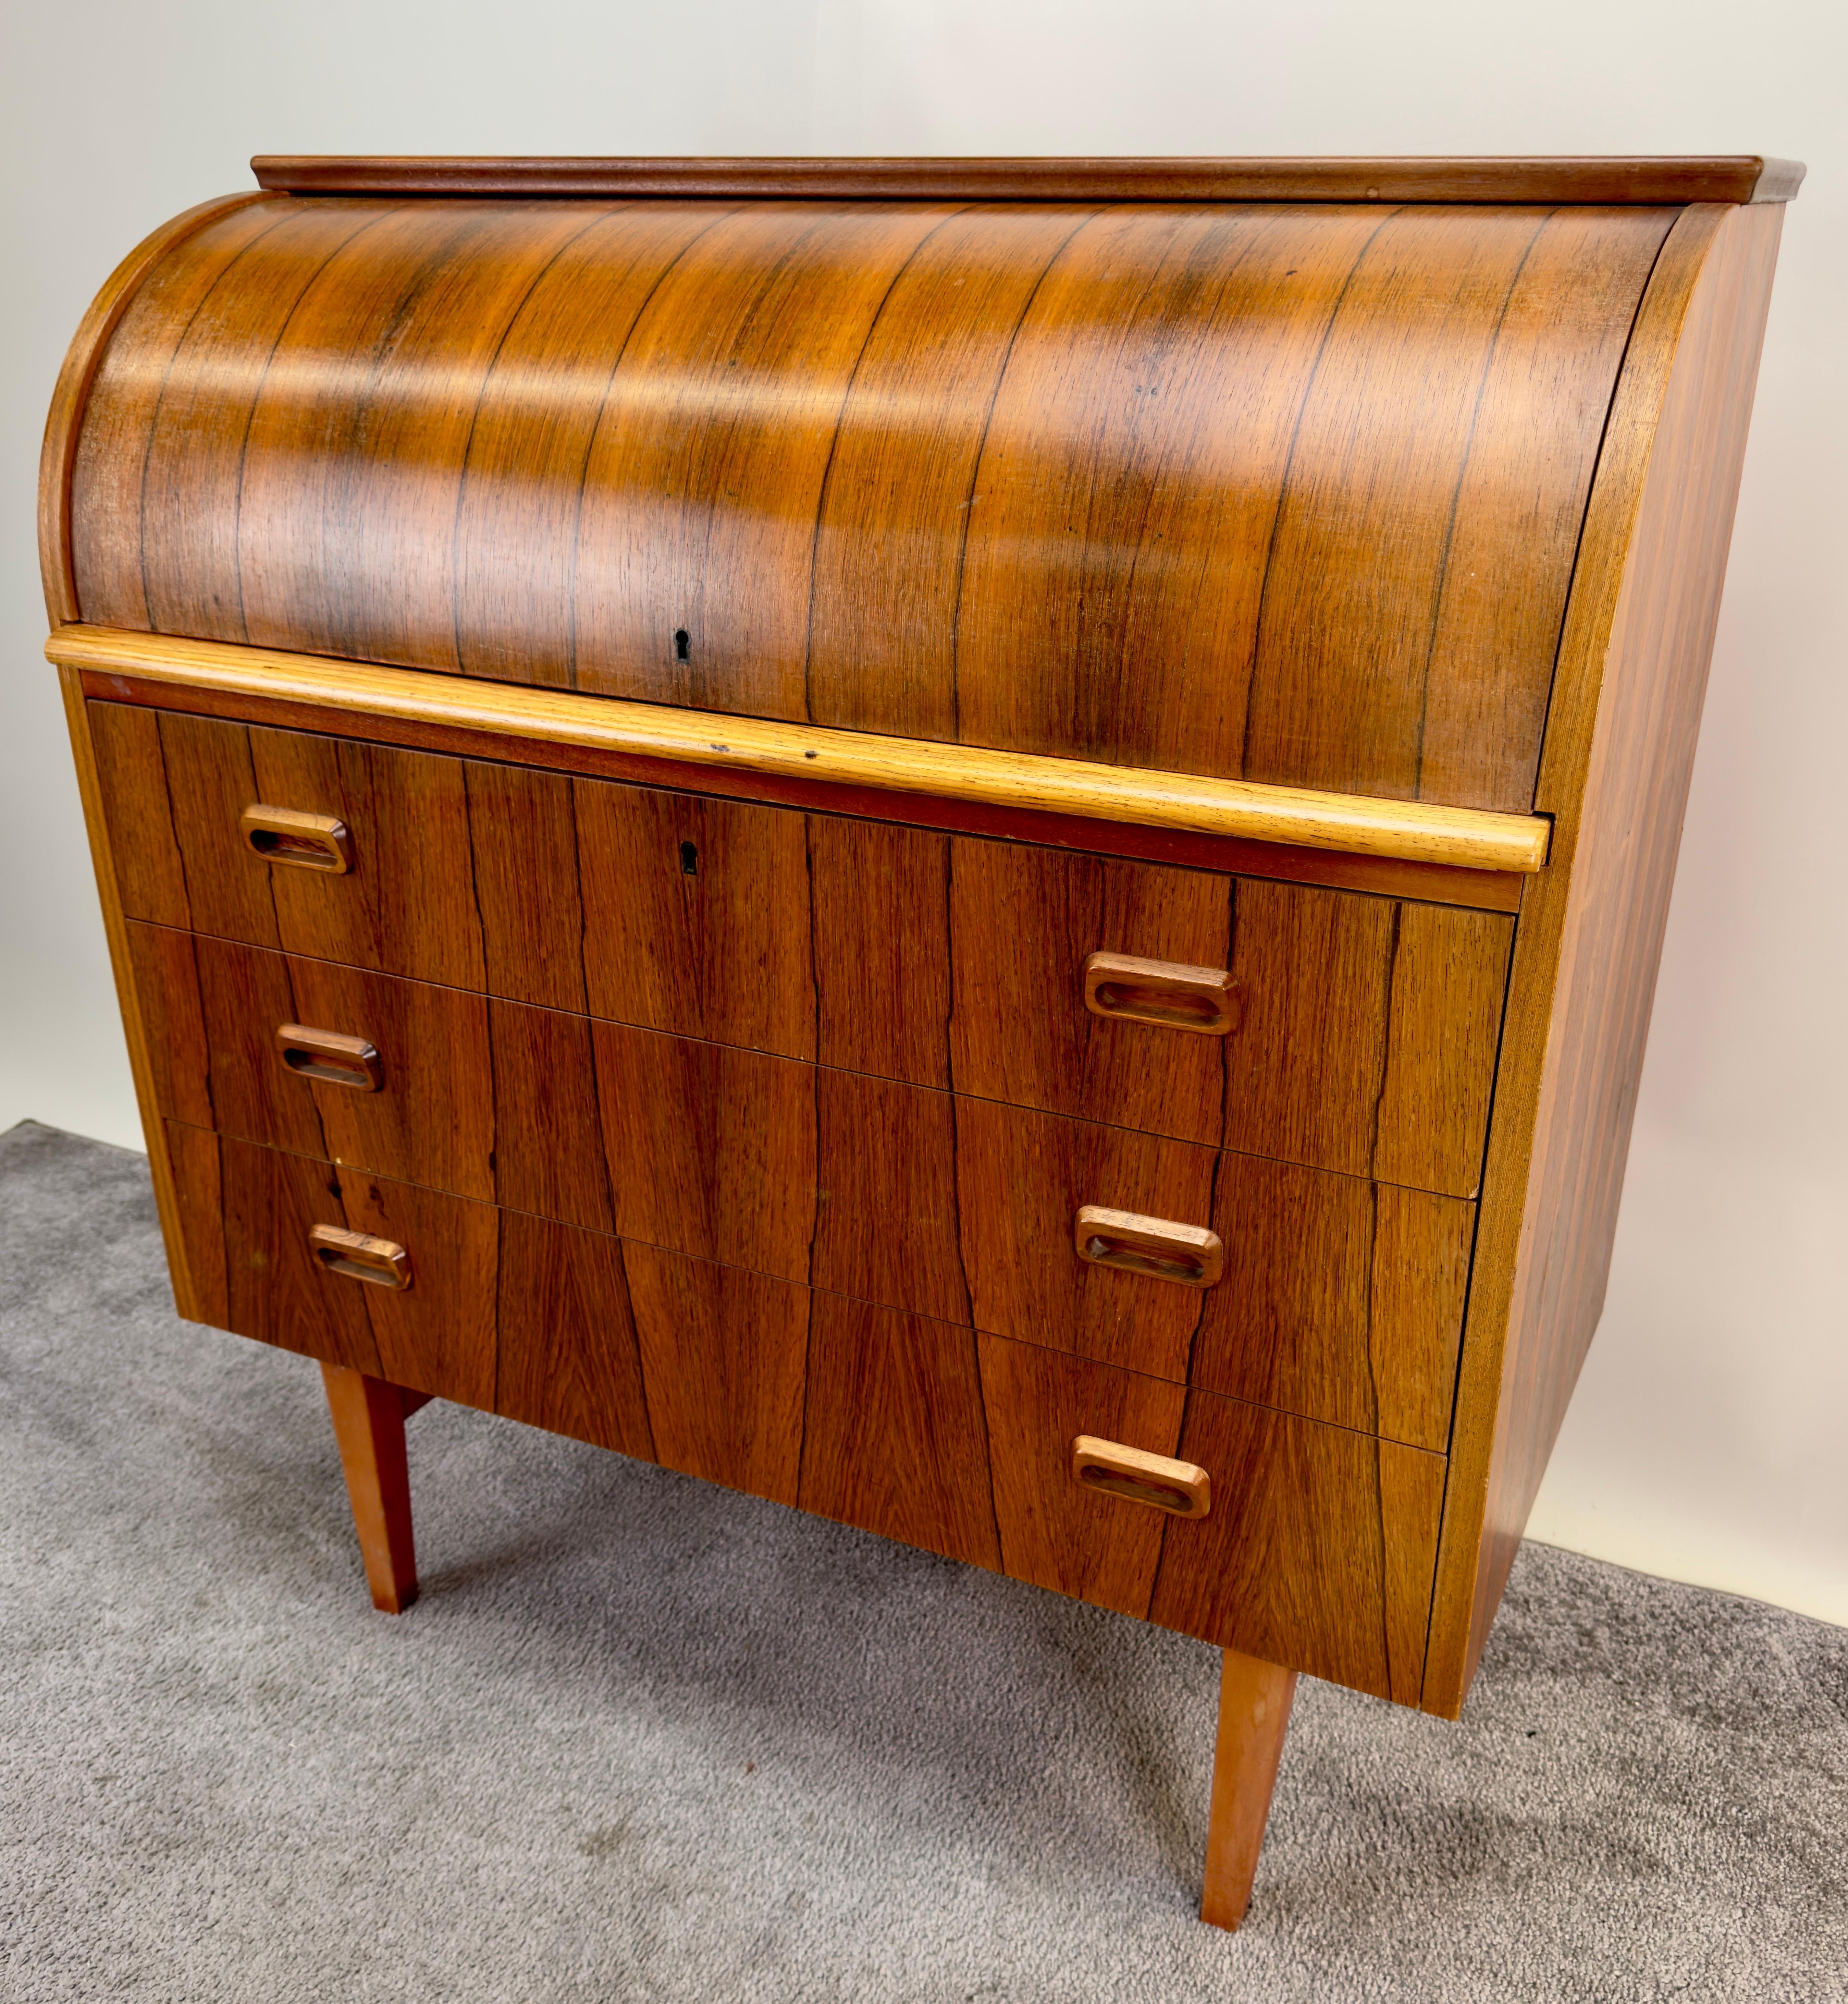 A rare Bernhardt Pedersen & Son Danish Mid Century Modern roll top writing desk crafted from beautifully grained rosewood, the desk emanates a warm and inviting aura, drawing attention to the inherent beauty of the wood. One of the standout features